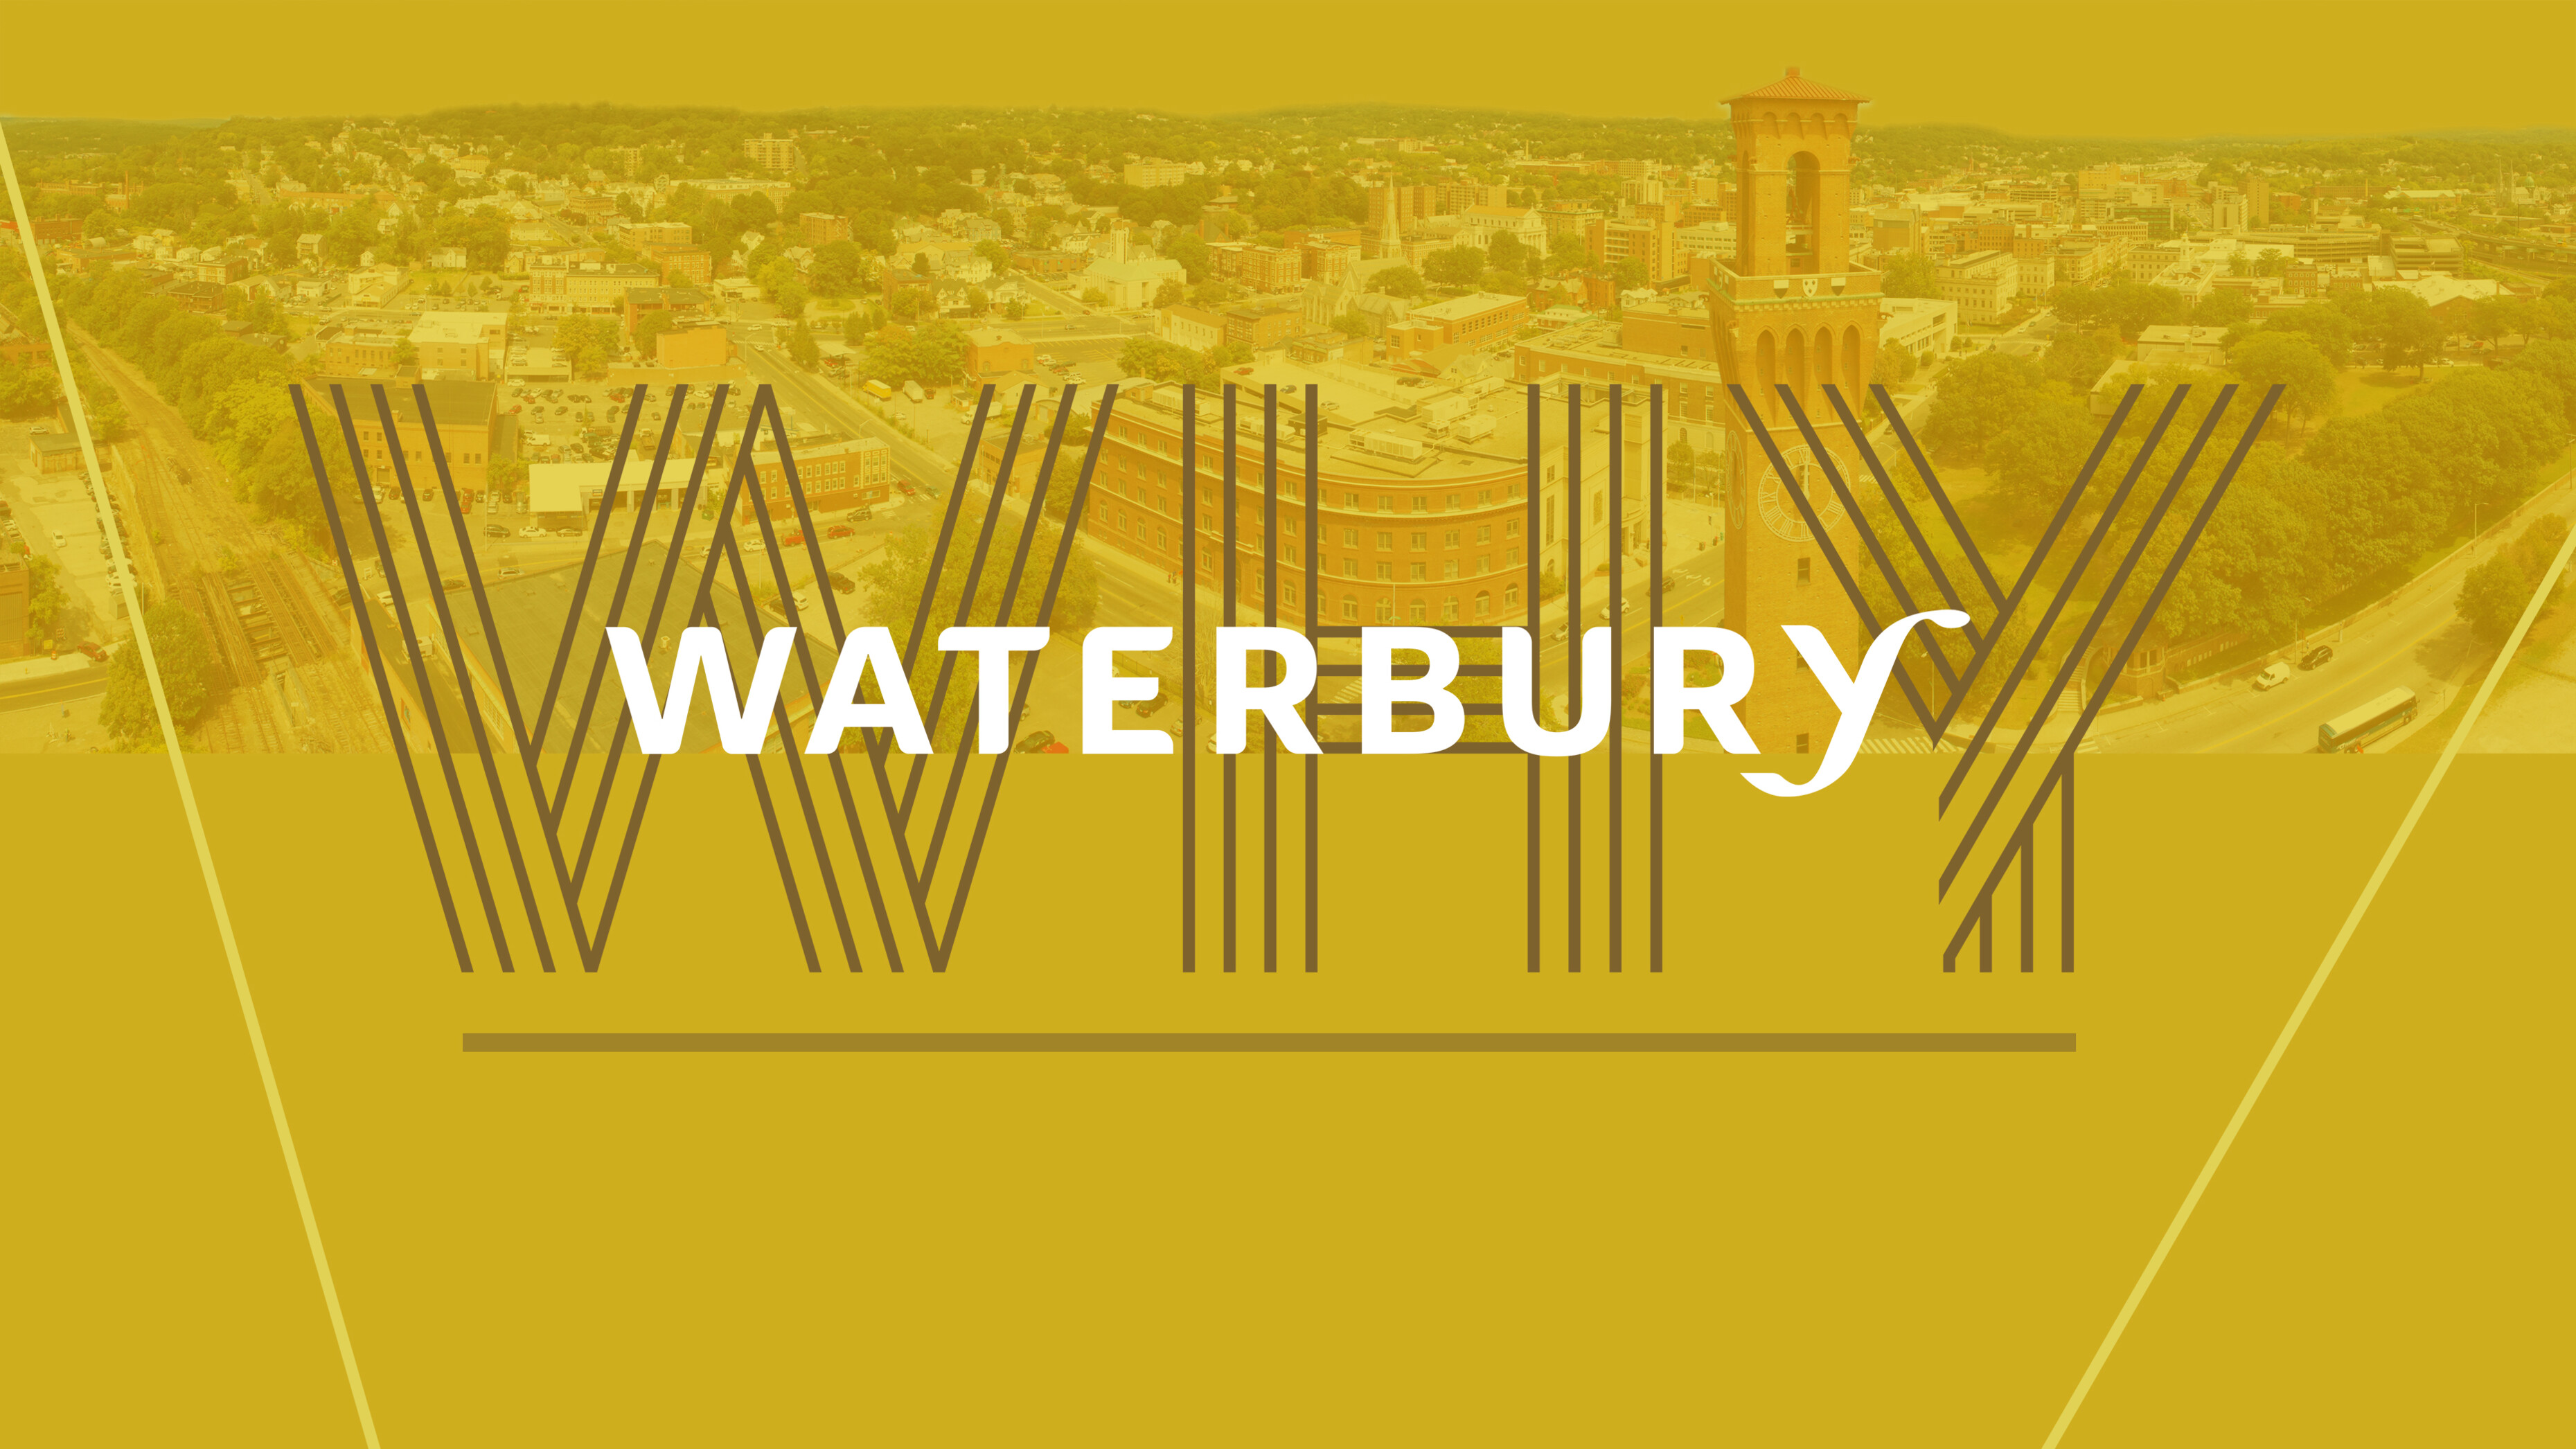 Text that says Why Waterbury over the city skyline.